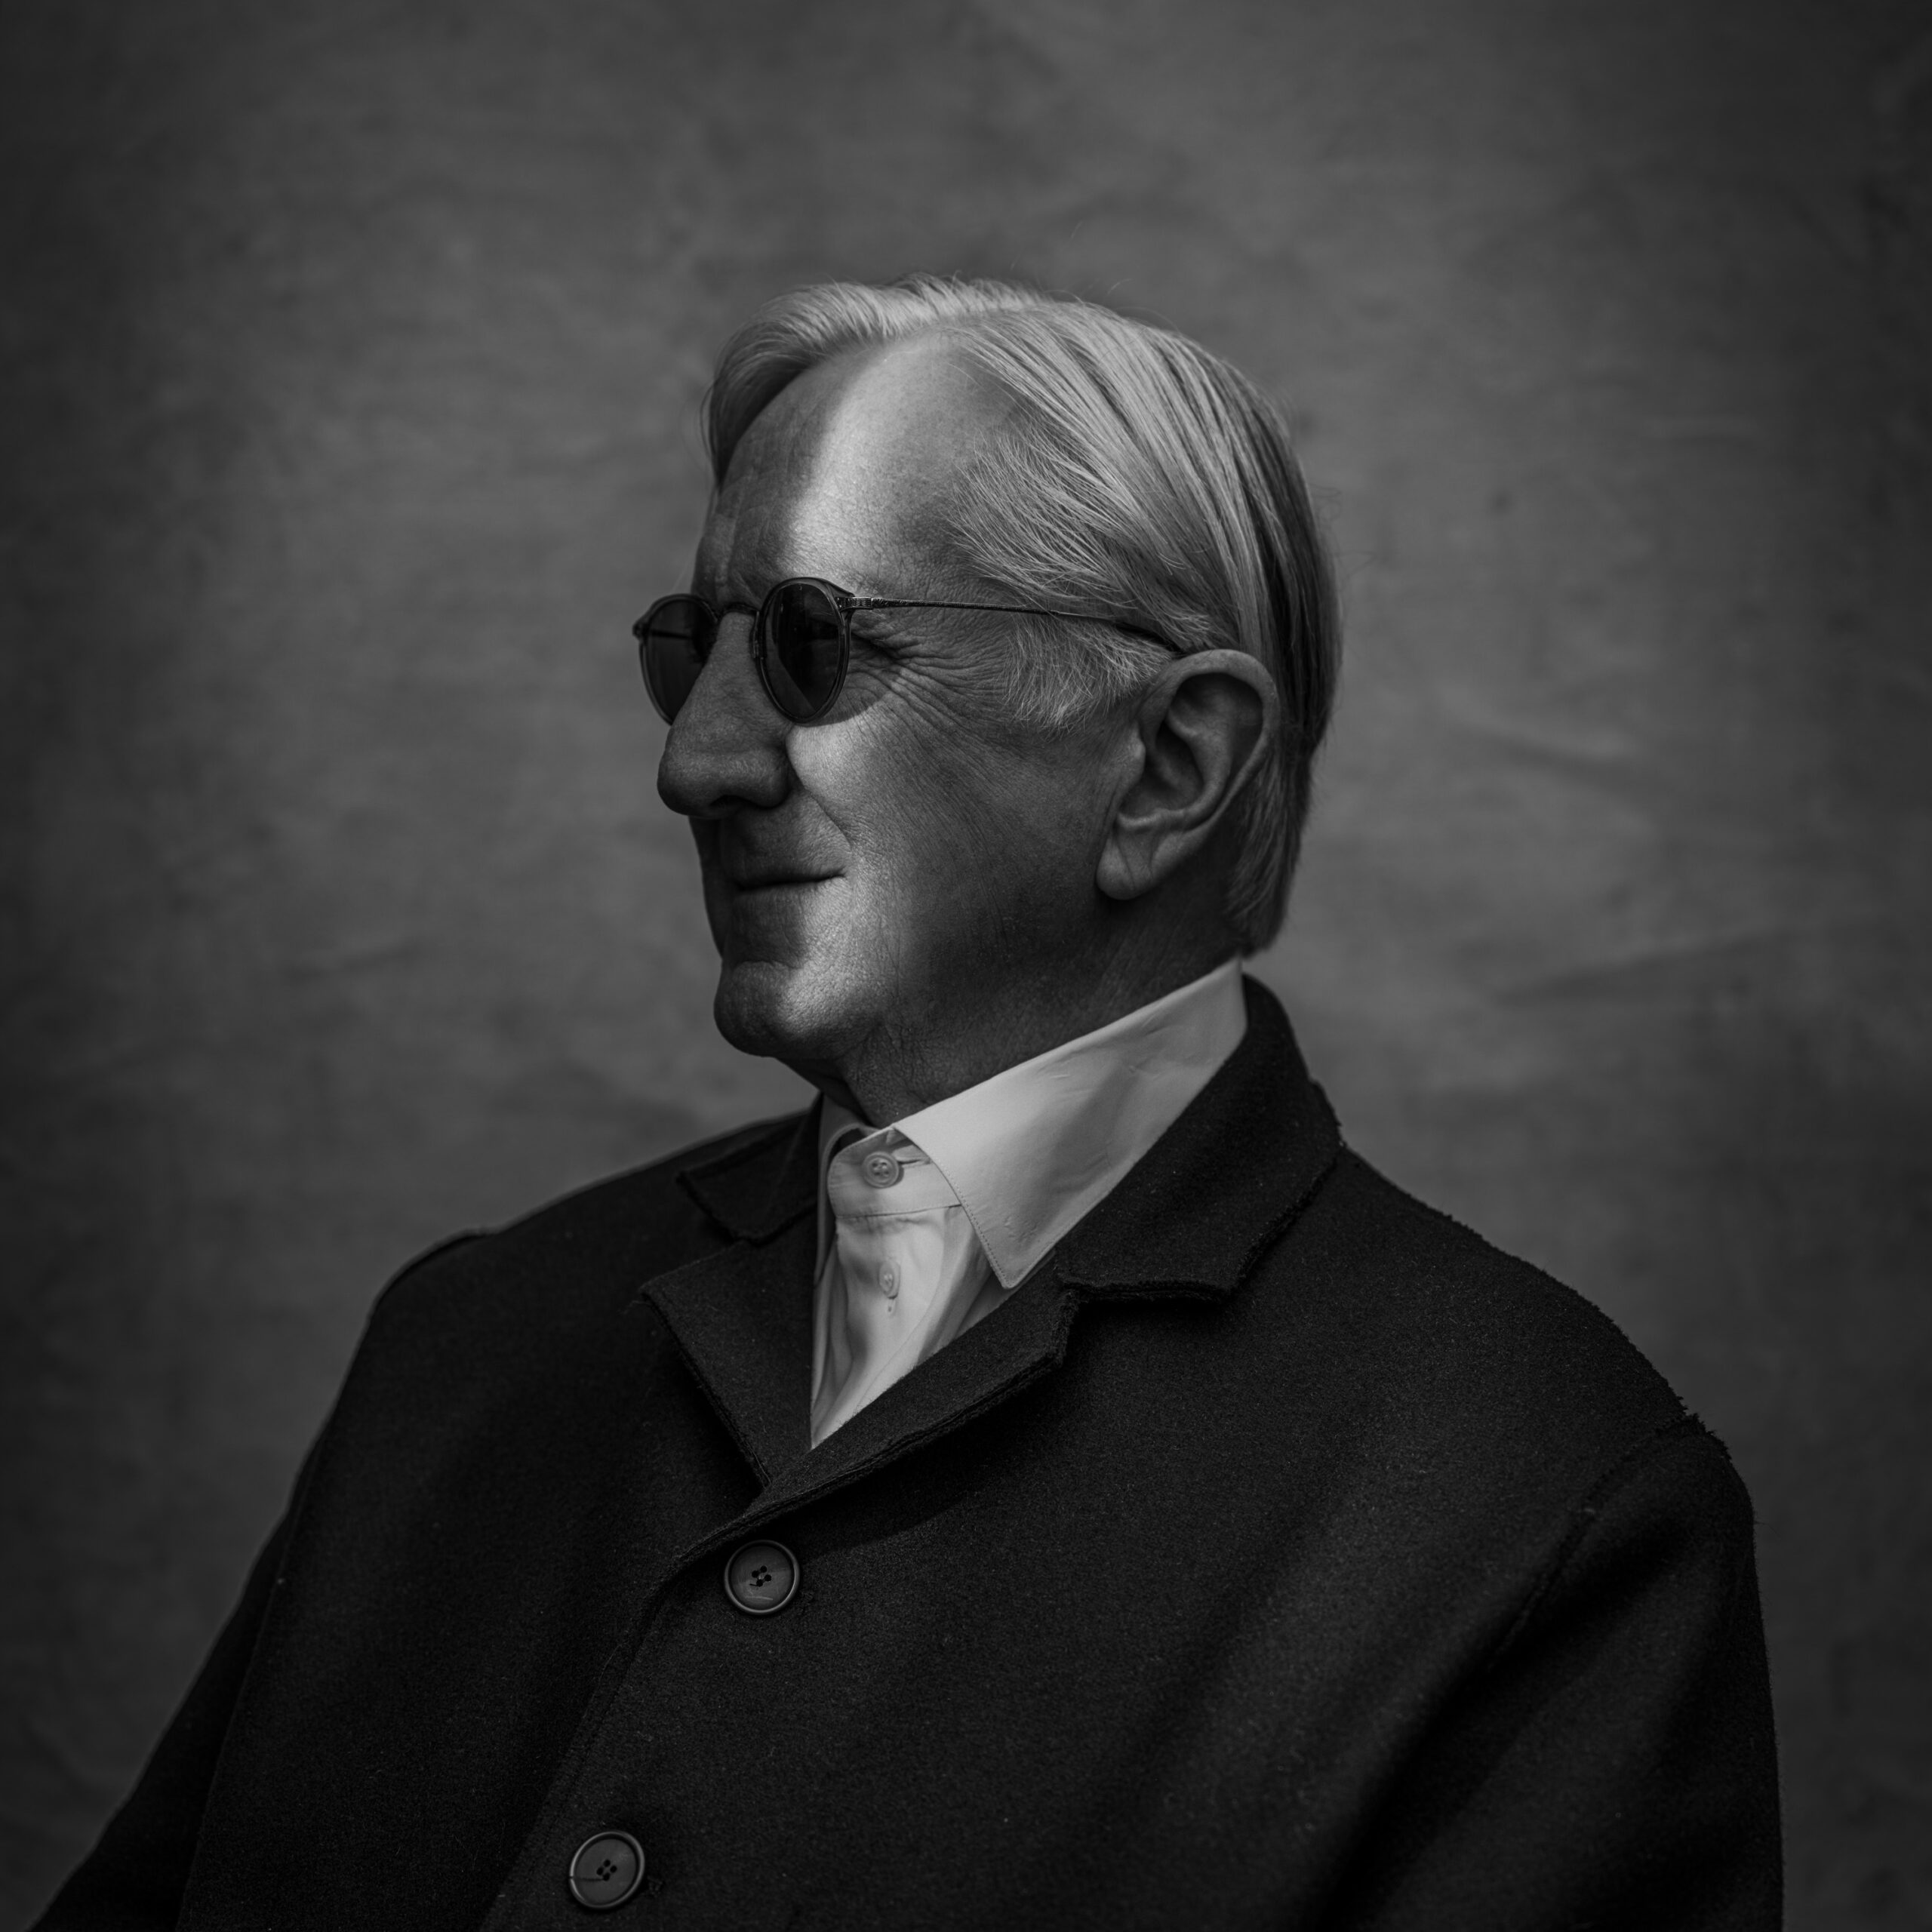 T Bone Burnett releases his first solo album in 20 years